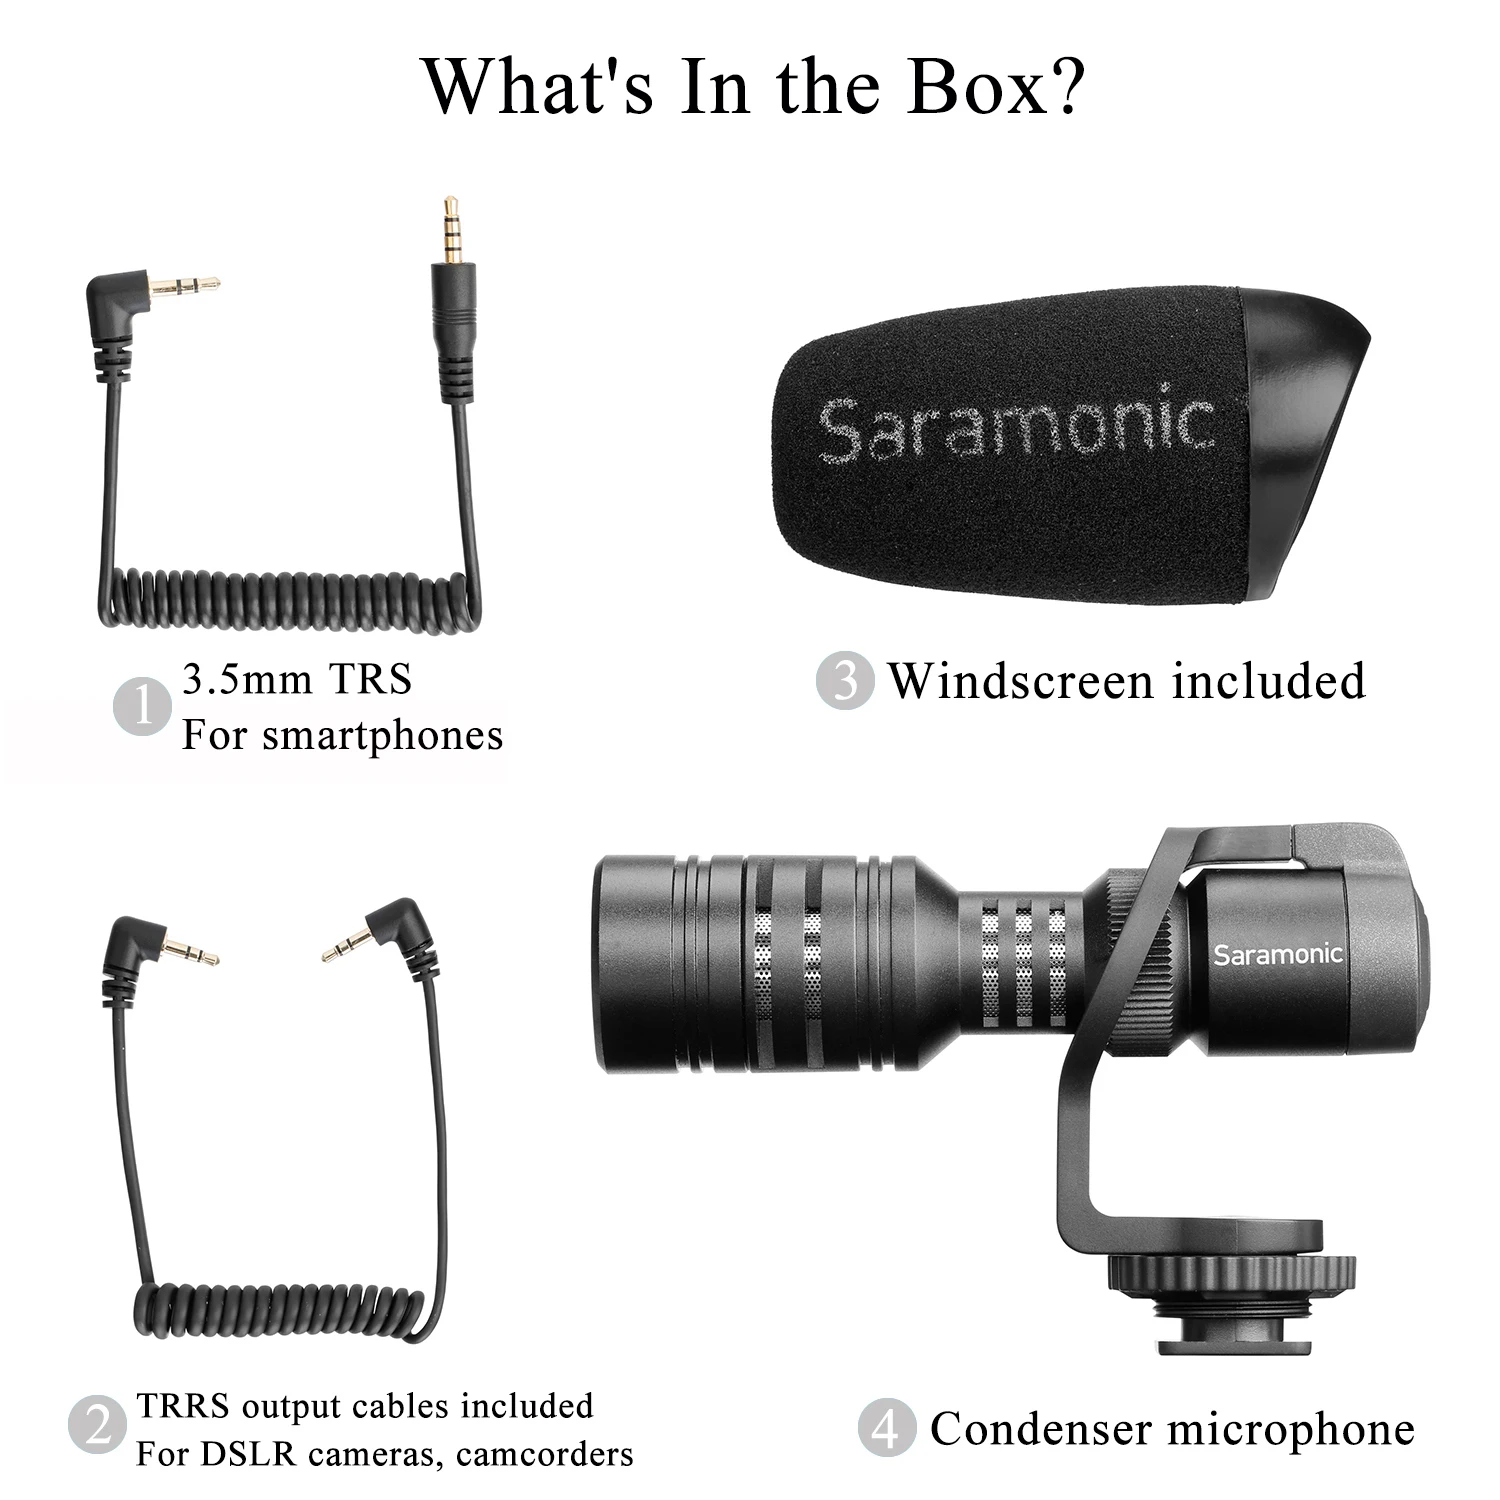 Saramonic Vmic Mini Microphone Grip Handle, Wrist Strap for Camera, Smartphone with Integrated Shock Mount- Vlogging Equipment enlarge